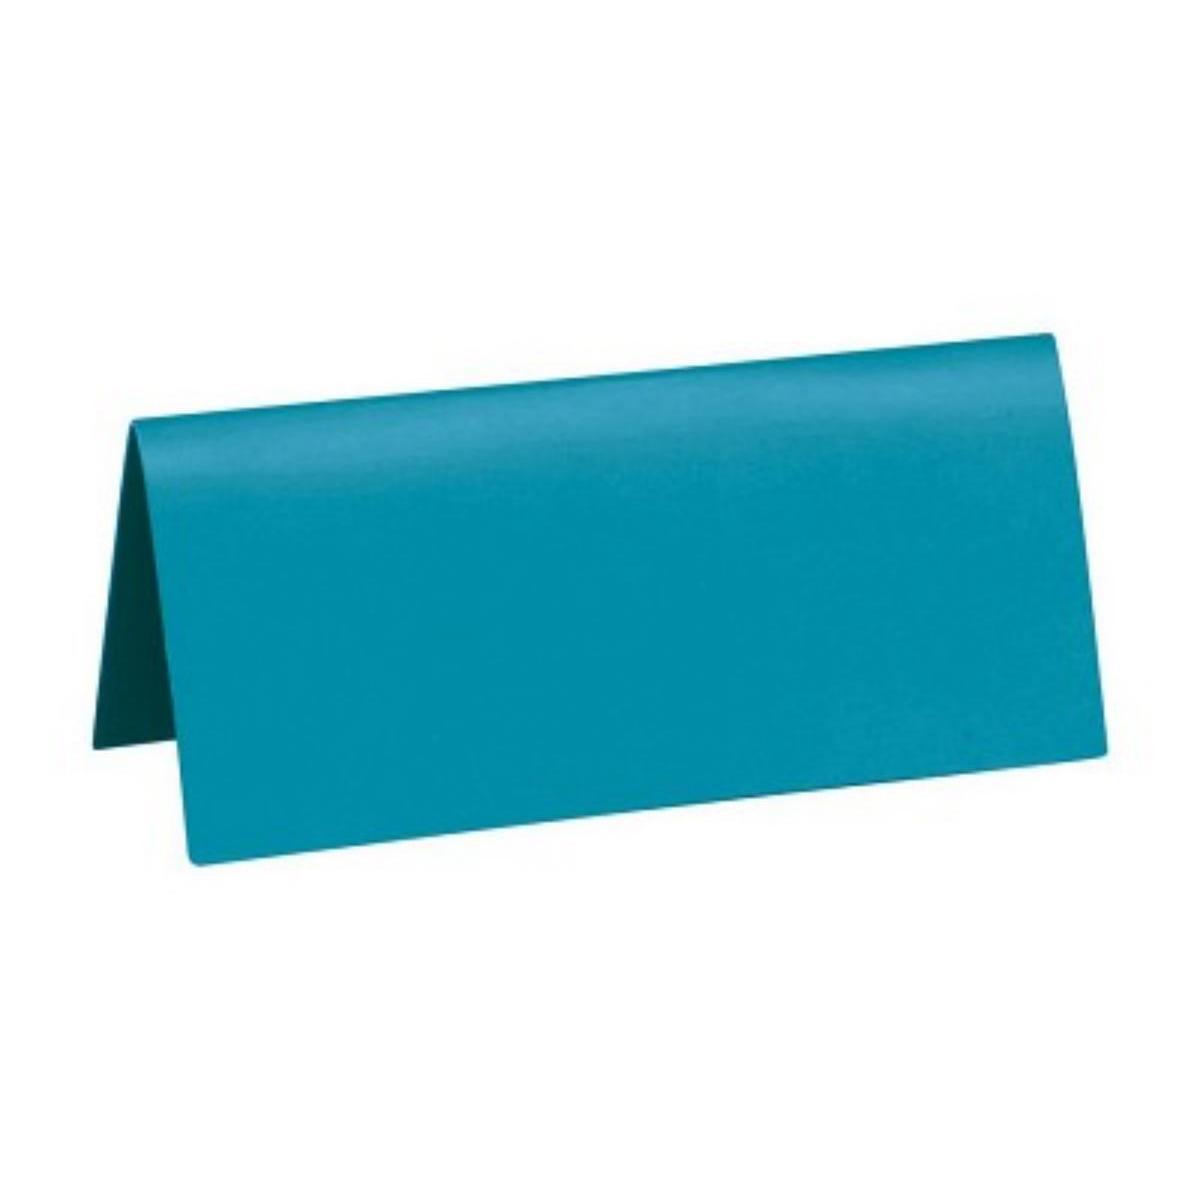 MARQUE PLACE RECTANGLE TURQUOI